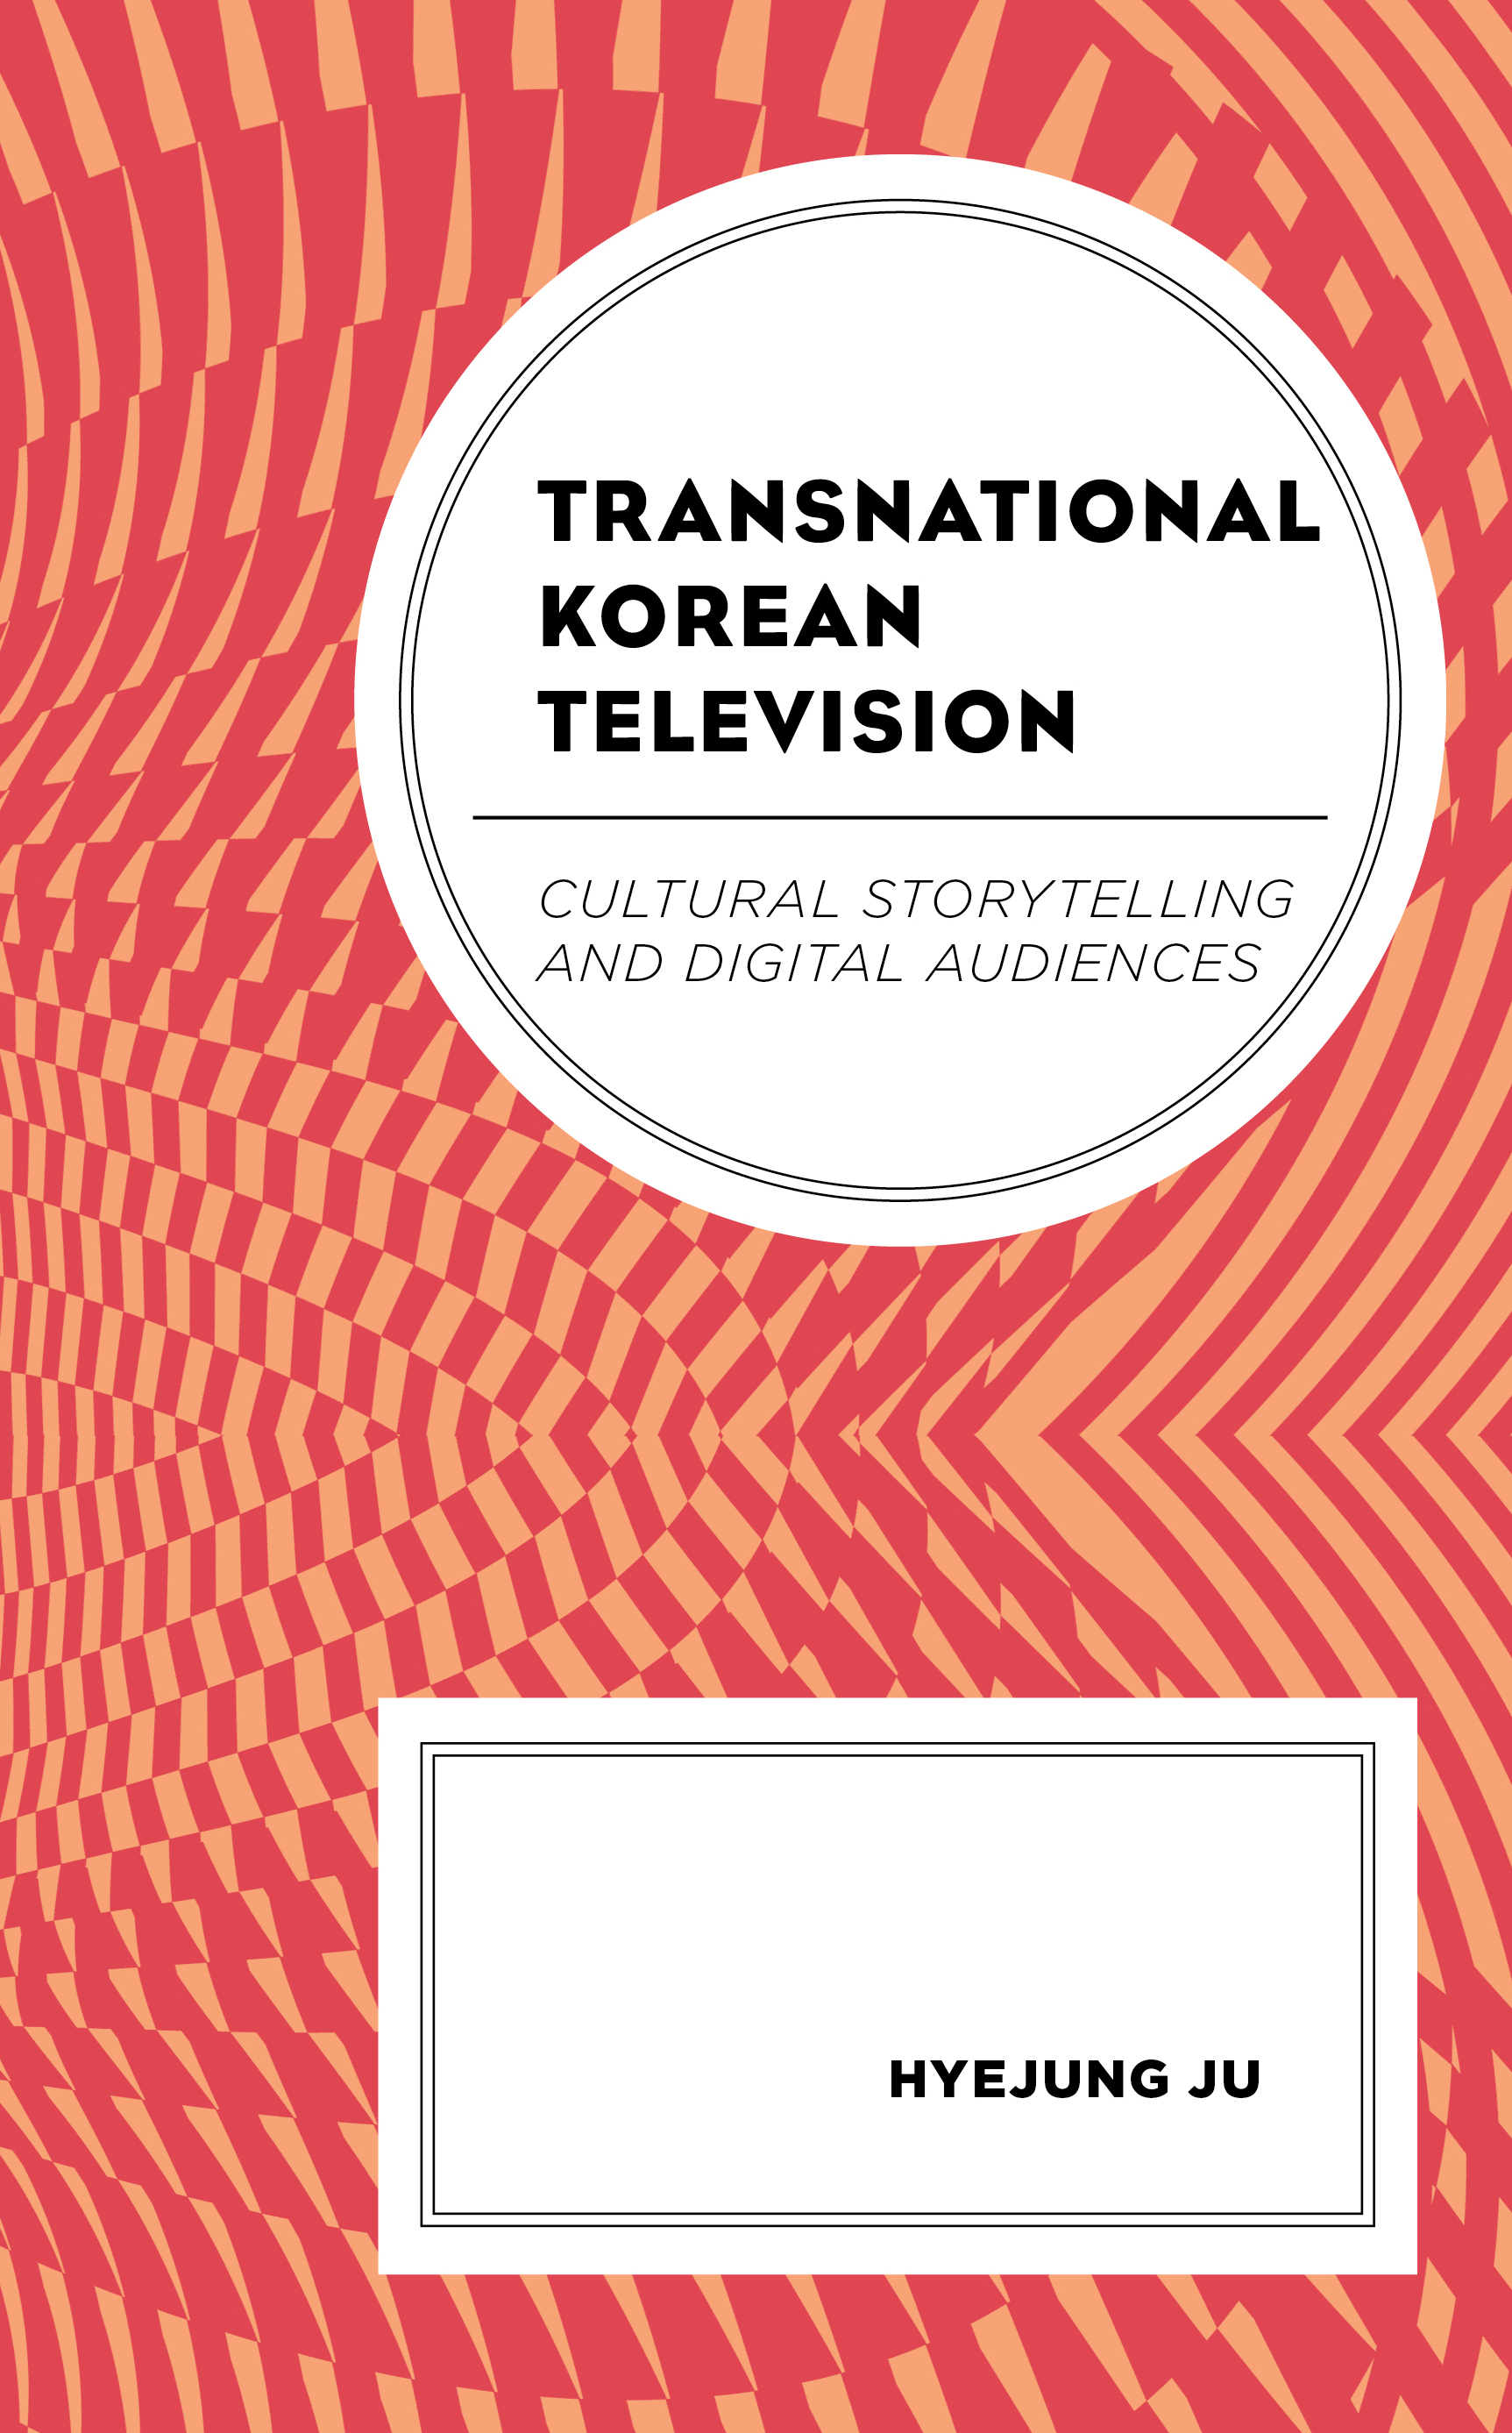 Transnational Korean Television: Cultural Storytelling and Digital Audiences